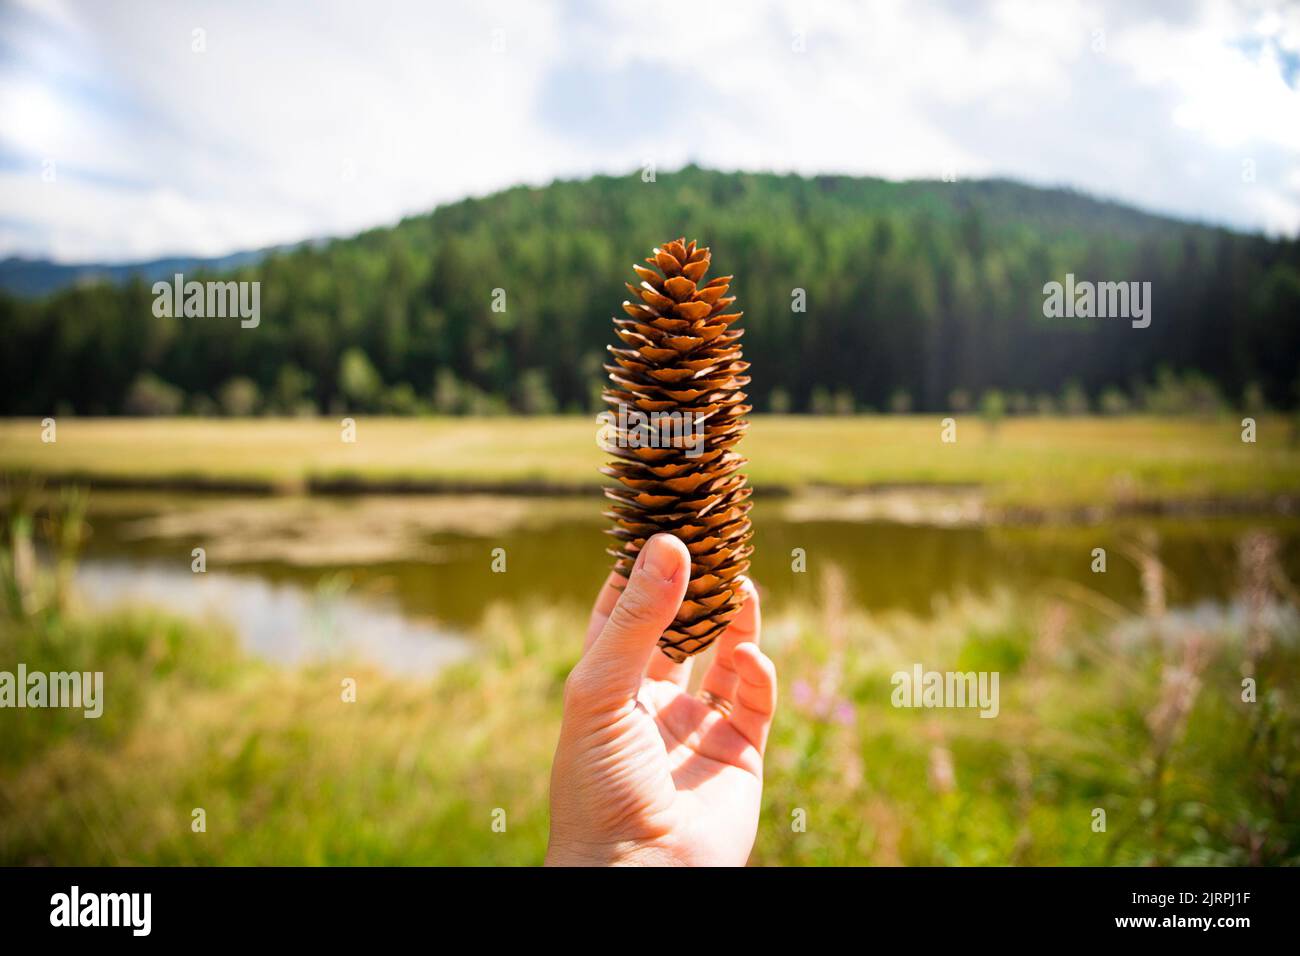 Caucasian hand holding a spruce pine cone in a natural mountain landscape on a sunny day. Pian di Gembro natural park, Valtellina, Italy. Stock Photo